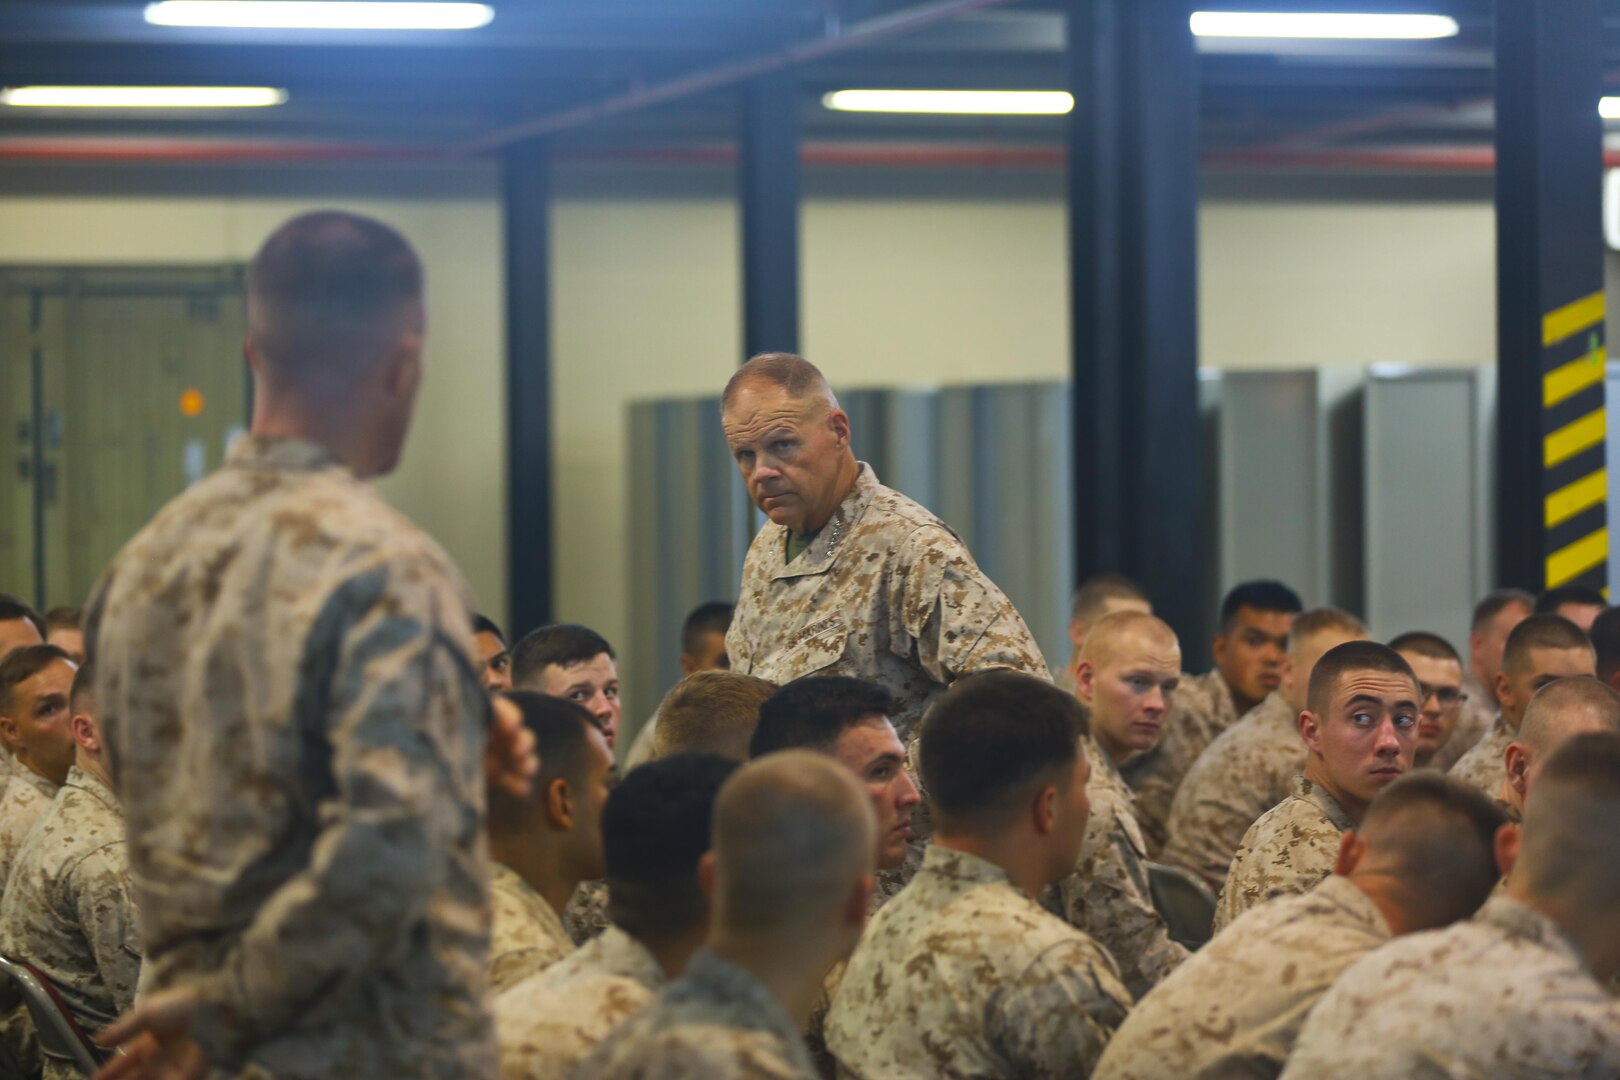 Commandant of the Marine Corps, Gen. Robert B. Neller listens to a question from a Marine with the Fleet Anti-Terrorism Security Team Central Command (FASTCENT) during a town-hall meeting aboard Naval Support Activity Bahrain, June 21. During the town-hall, Neller discussed updated social media guidance, his expectation that Marines will treat each other with dignity and respect, as well as, the importance of naval integration. (U.S. Marine Corps photo by Cpl. Travis Jordan/Released)